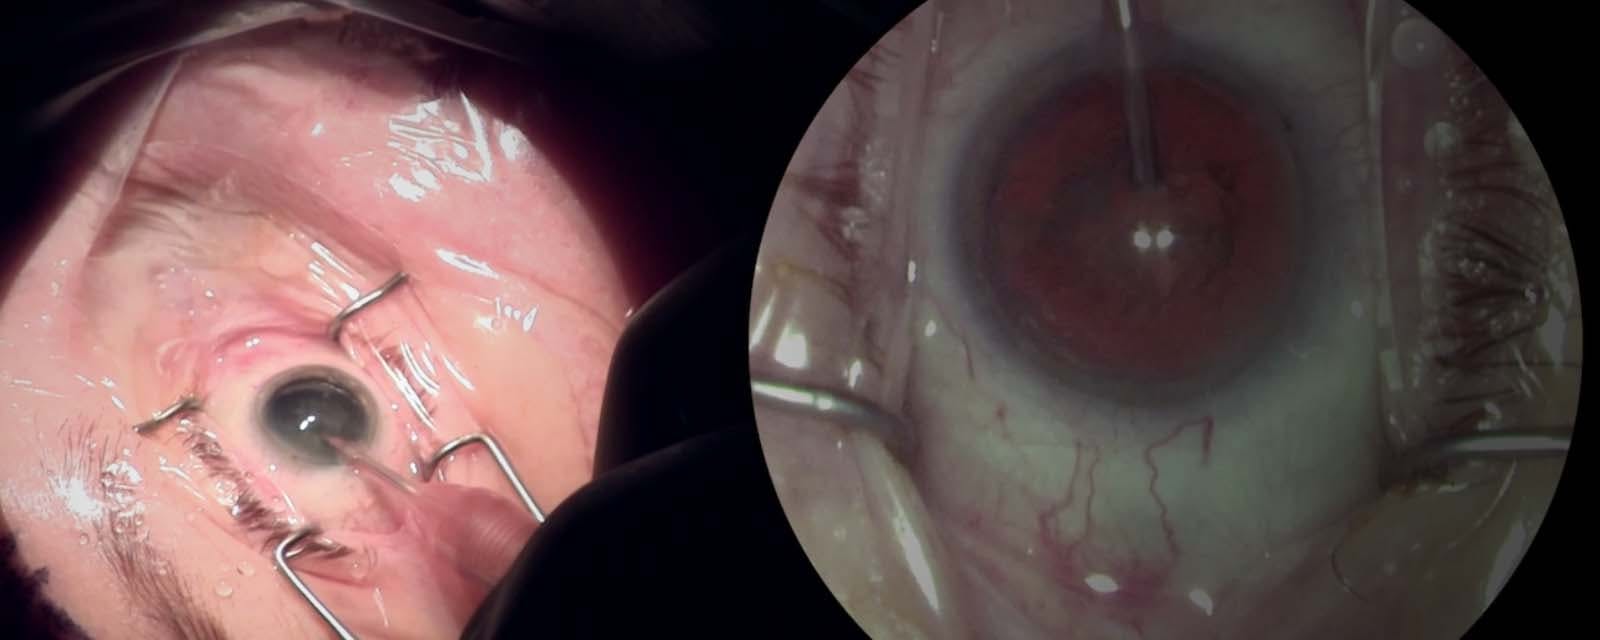 Cataract-Extraction-with-Phacoemulsification-and-Posterior-Chamber-Intraocular-Lens